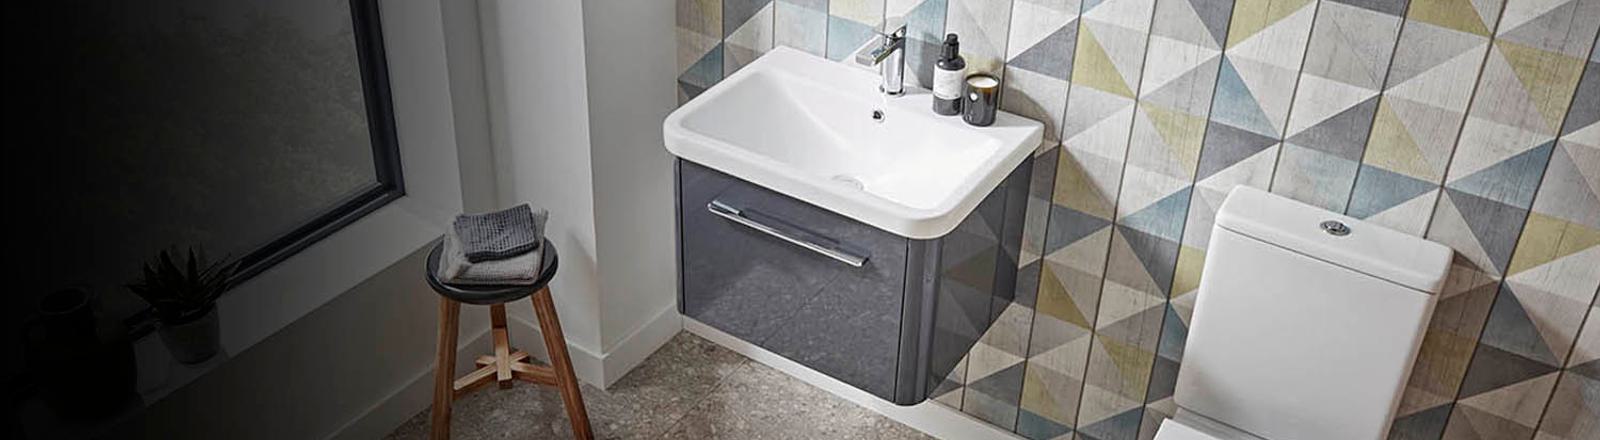 Furniture to fit the contours of your bathroom